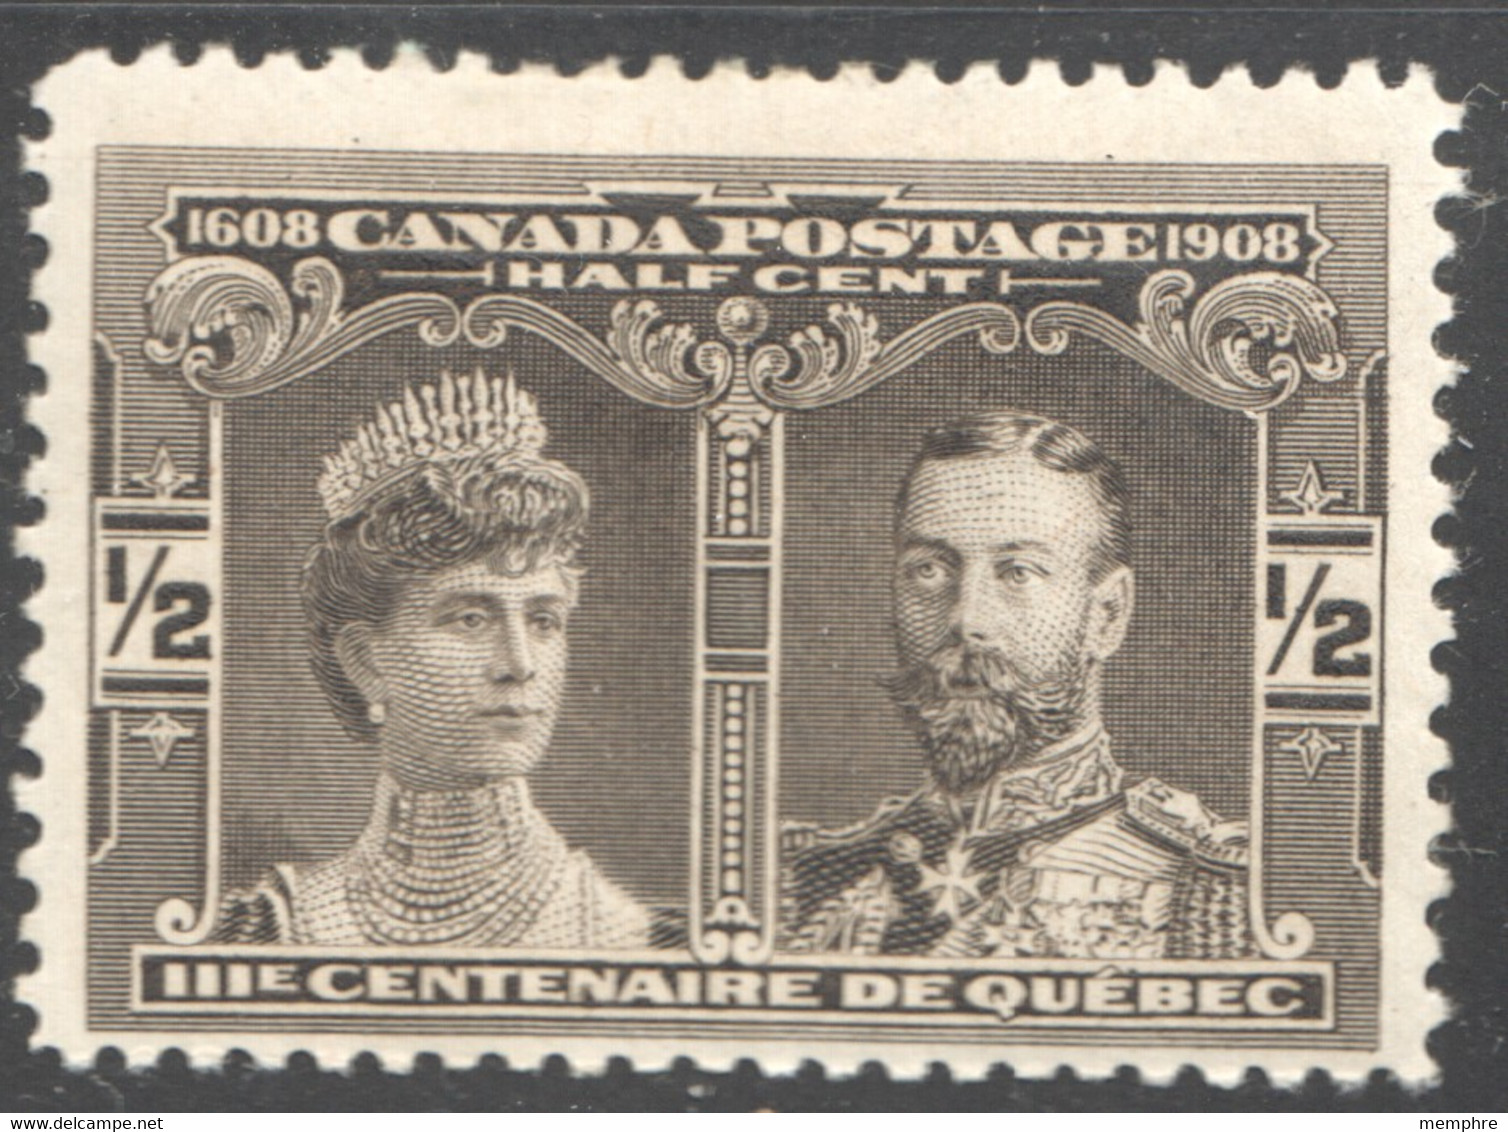 1908  Quebec City Tercentenary  ½ ¢  Prince And Princess Of Wales  Scott 96  MH * - Unused Stamps